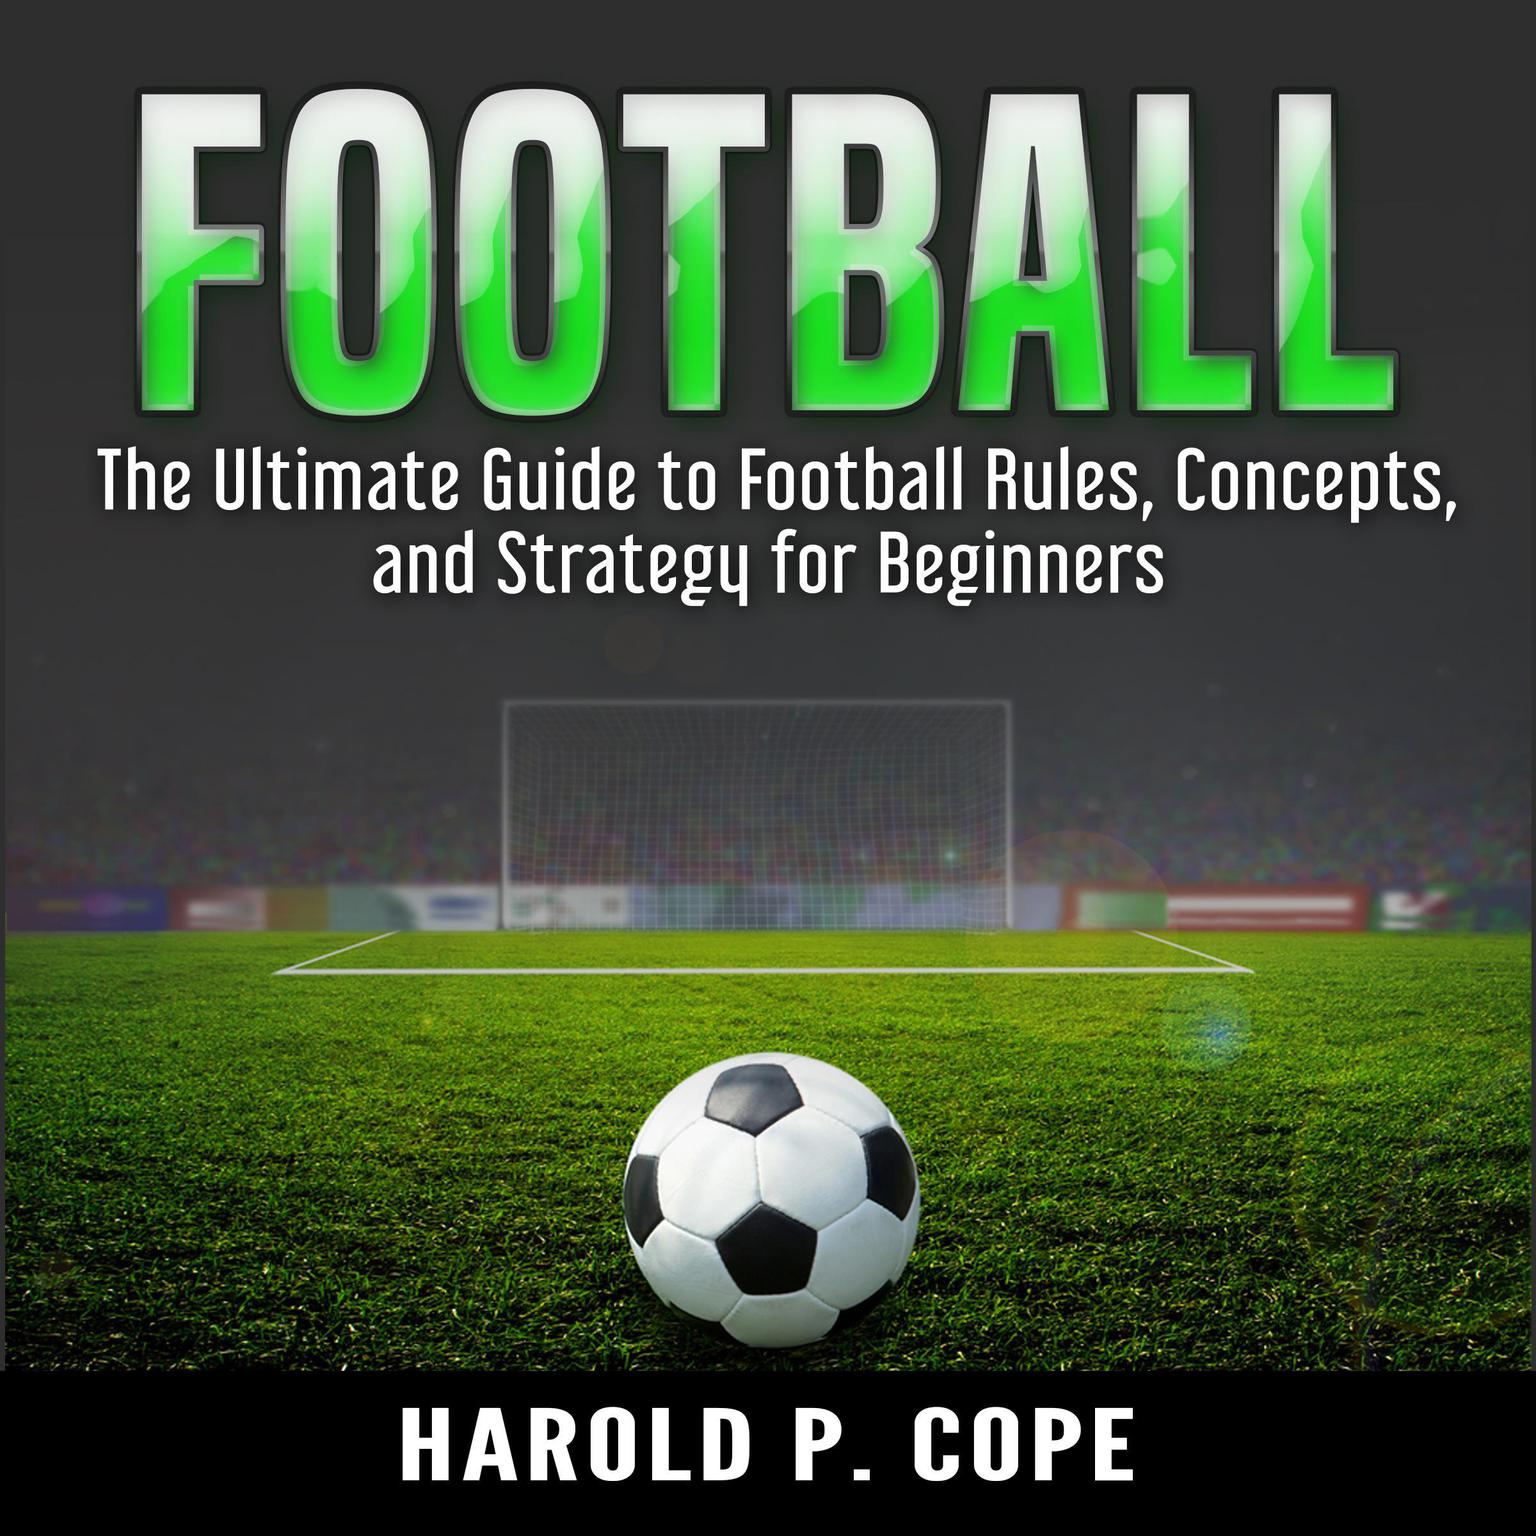 The Ultimate Guide to Football Rules, Concepts, and Strategy for Beginners Audiobook, by Harold P. Cope